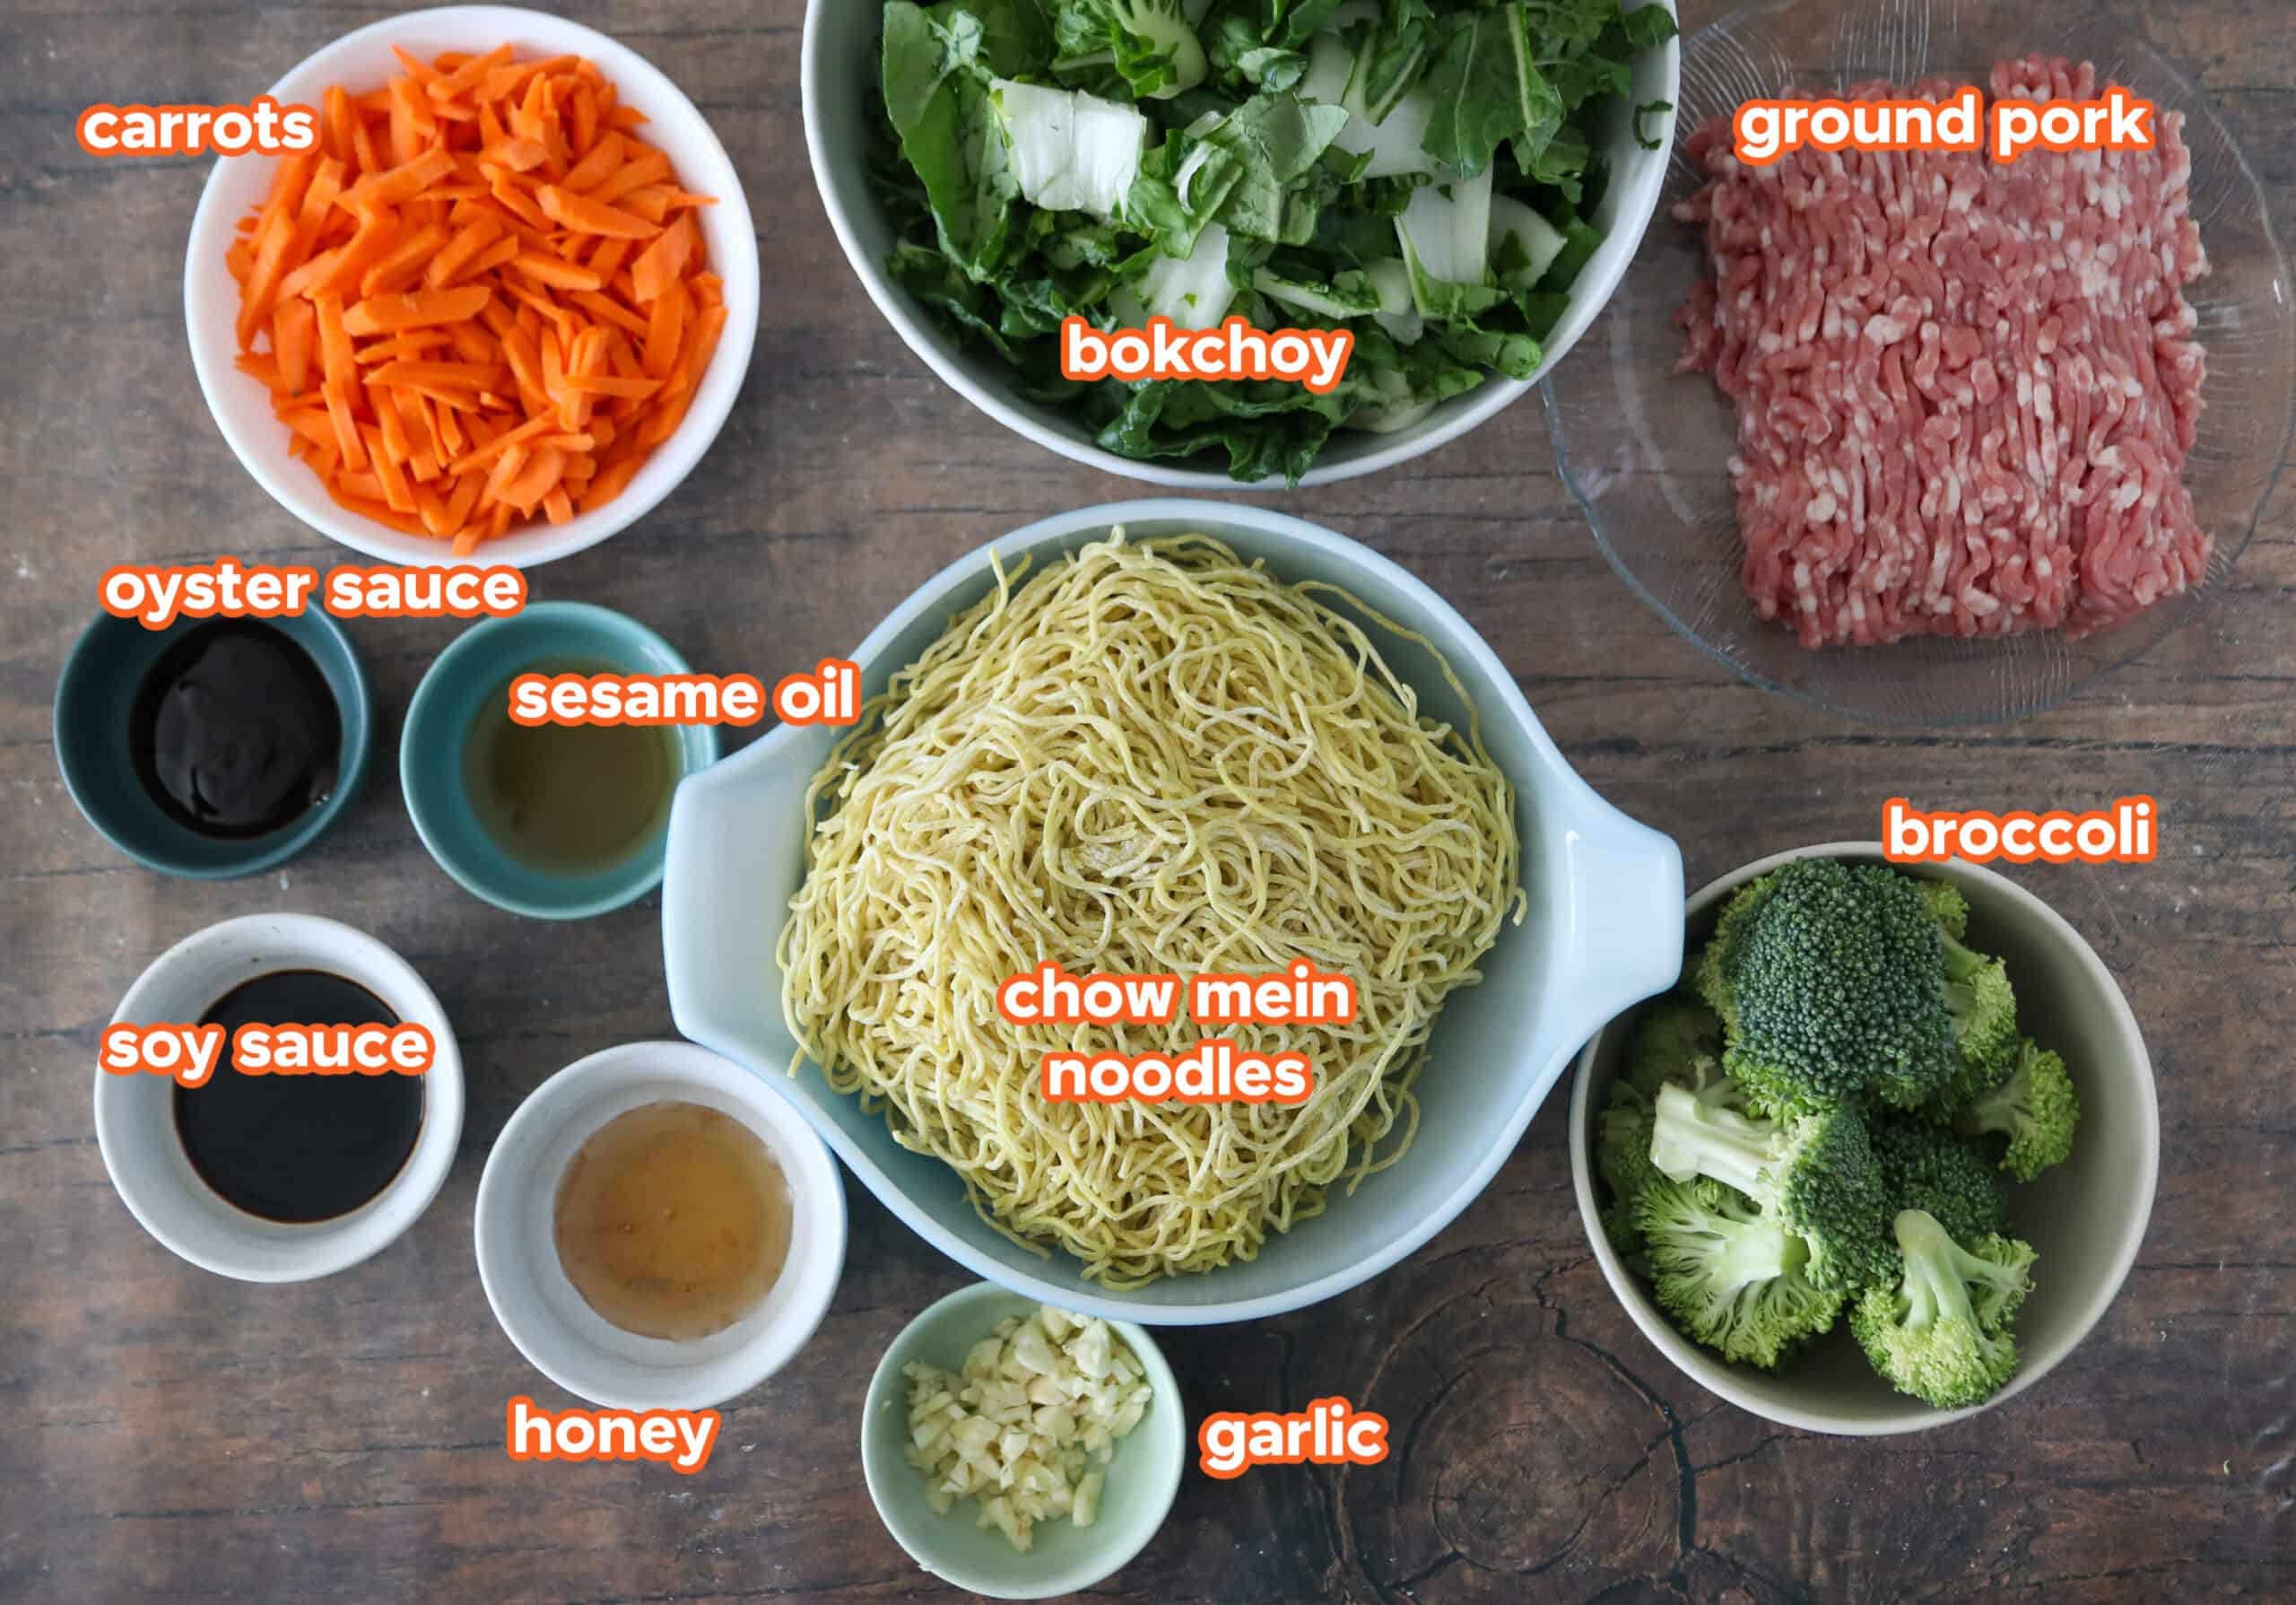 The ingredients for ground pork chow mein.